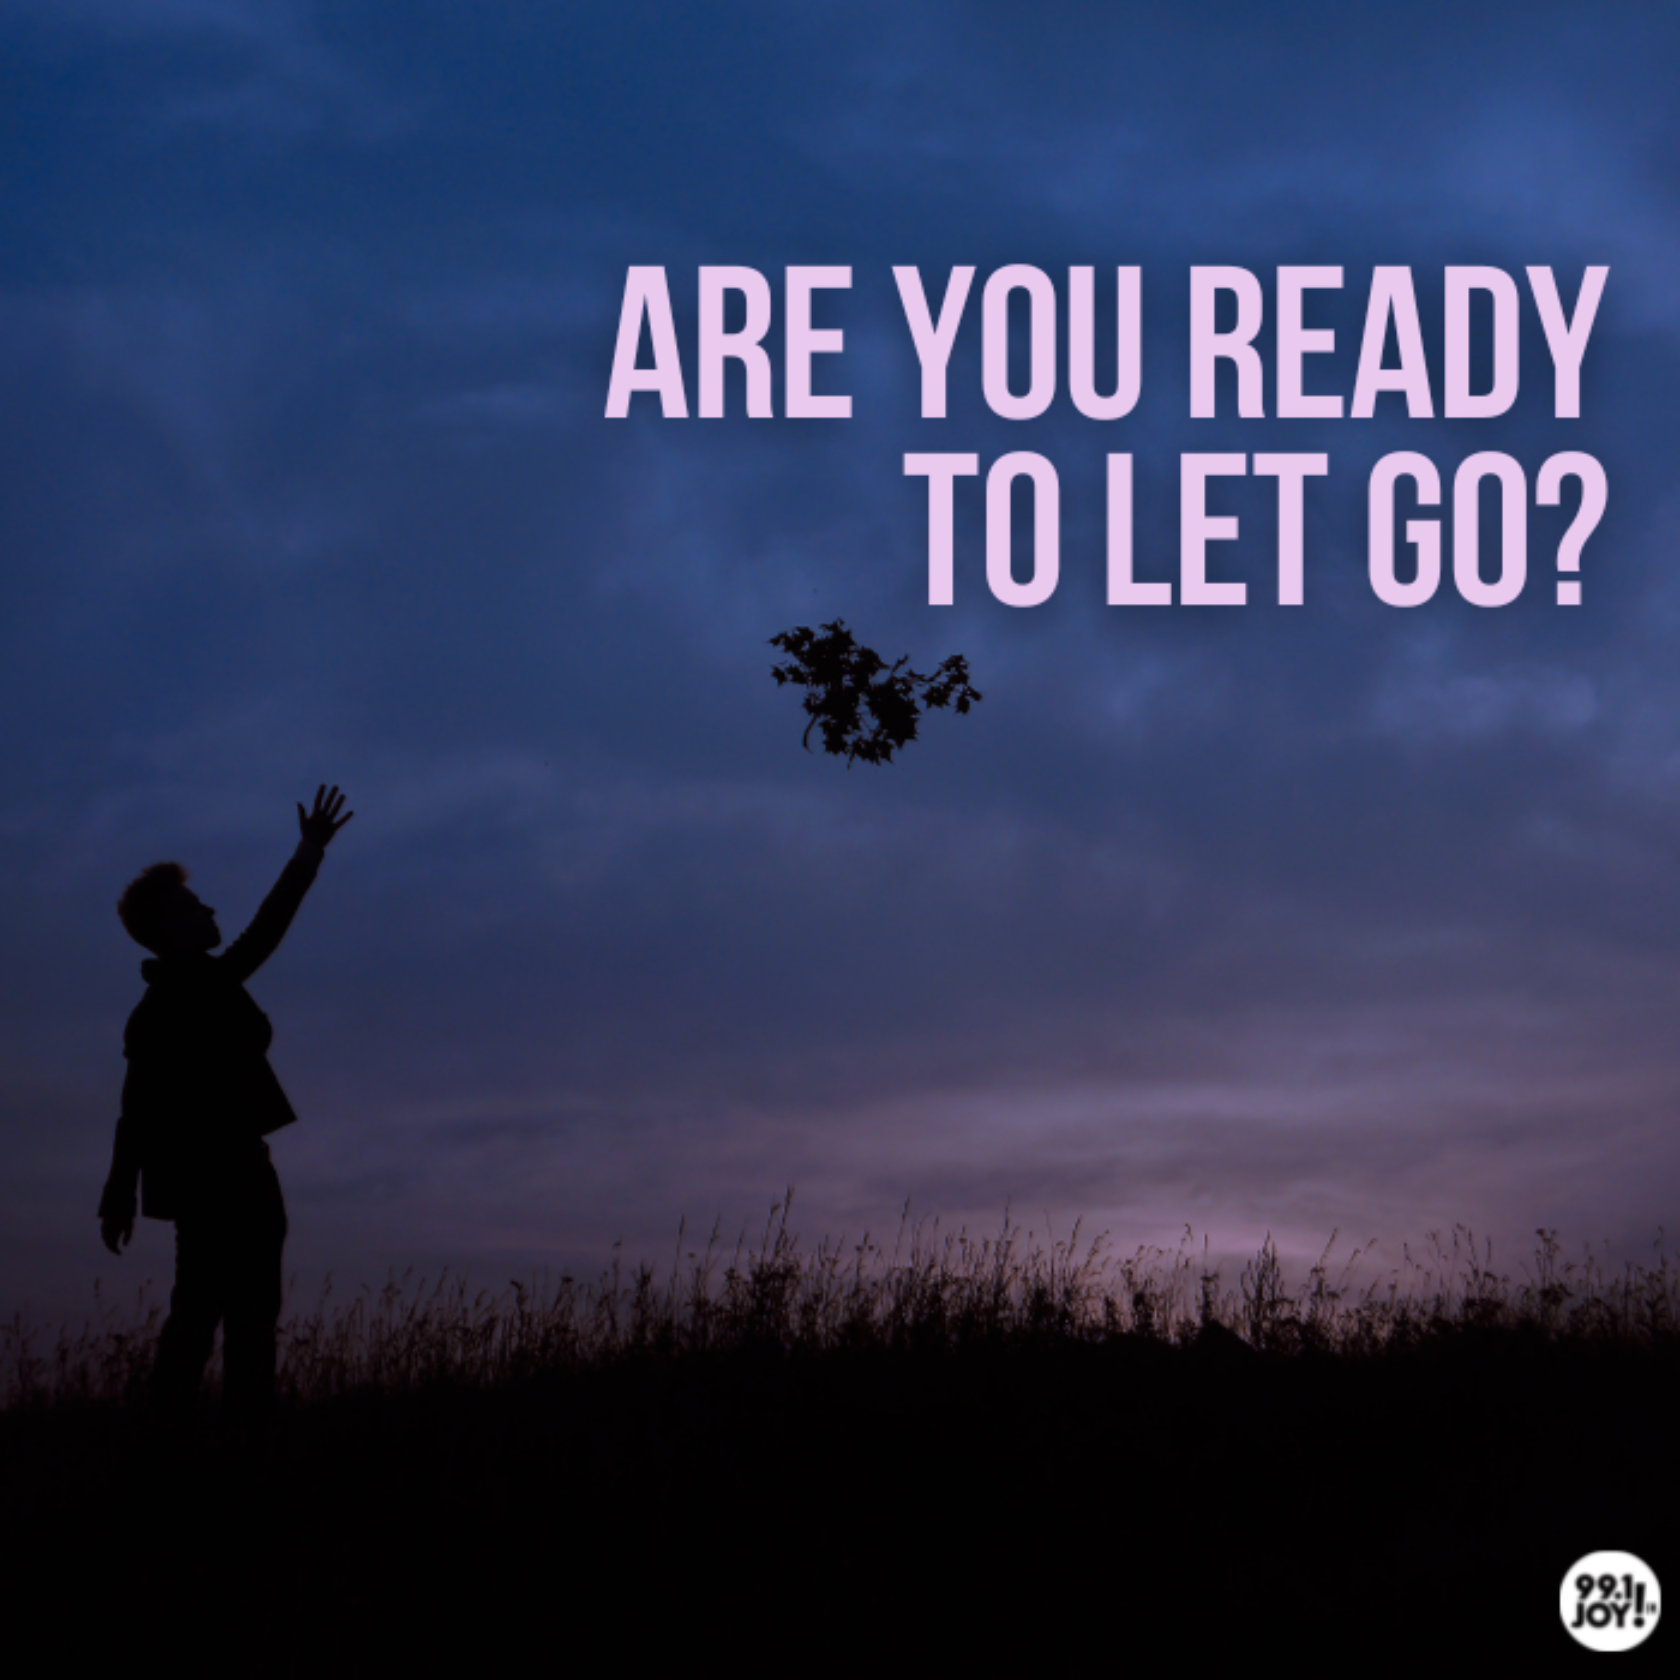 Are You Ready To Let Go?